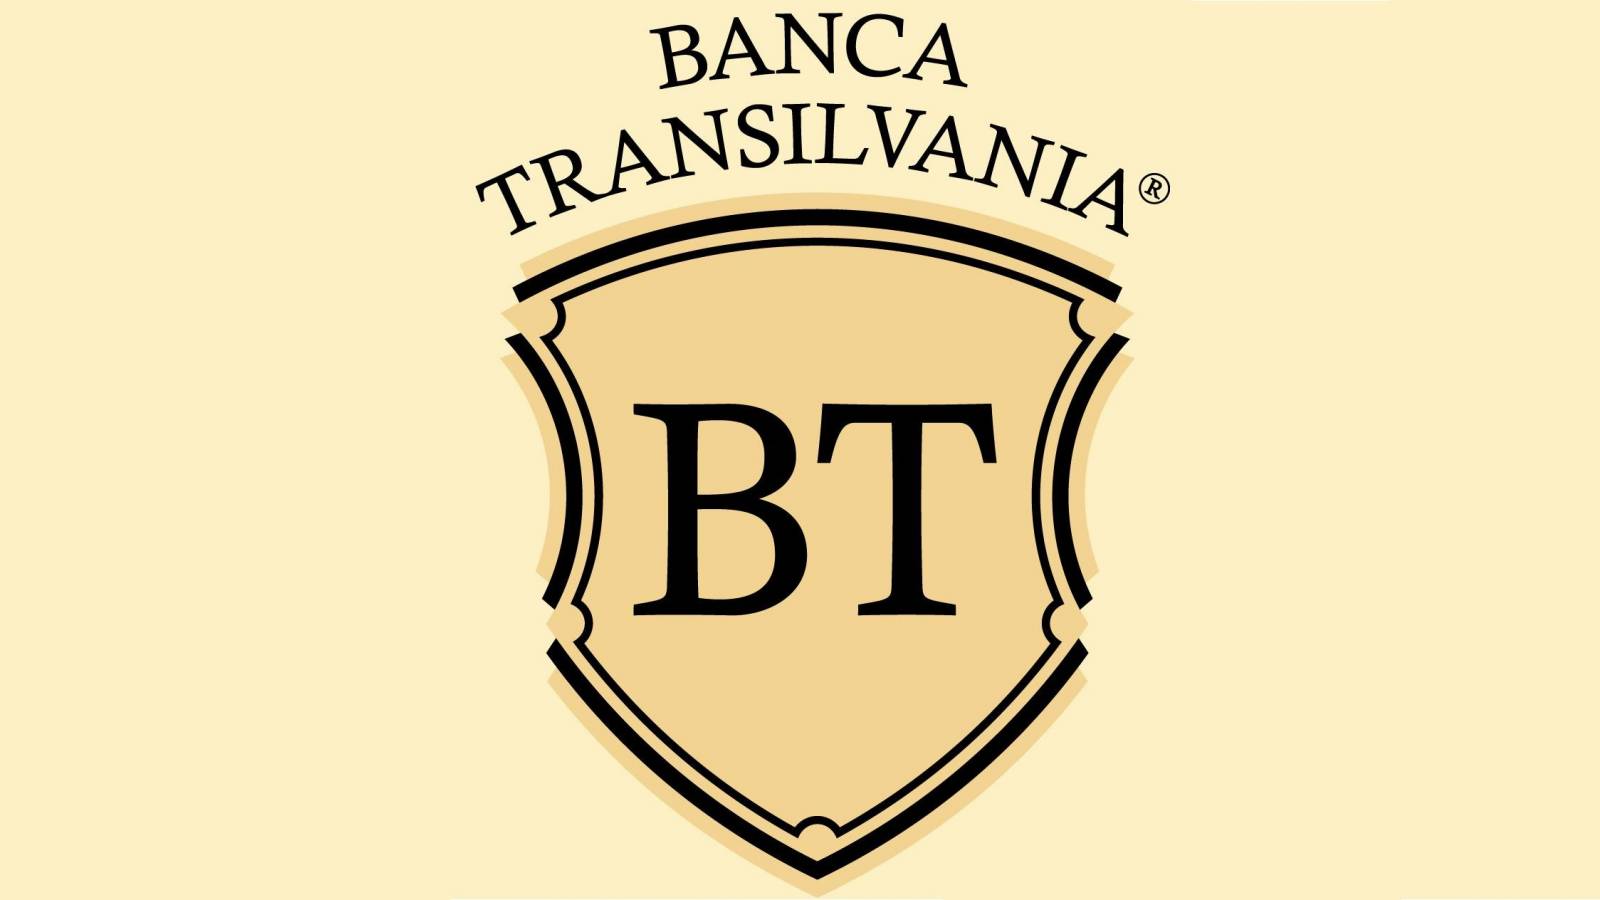 BANCA Transilvania MUST Know the Official Message Sent to Customers